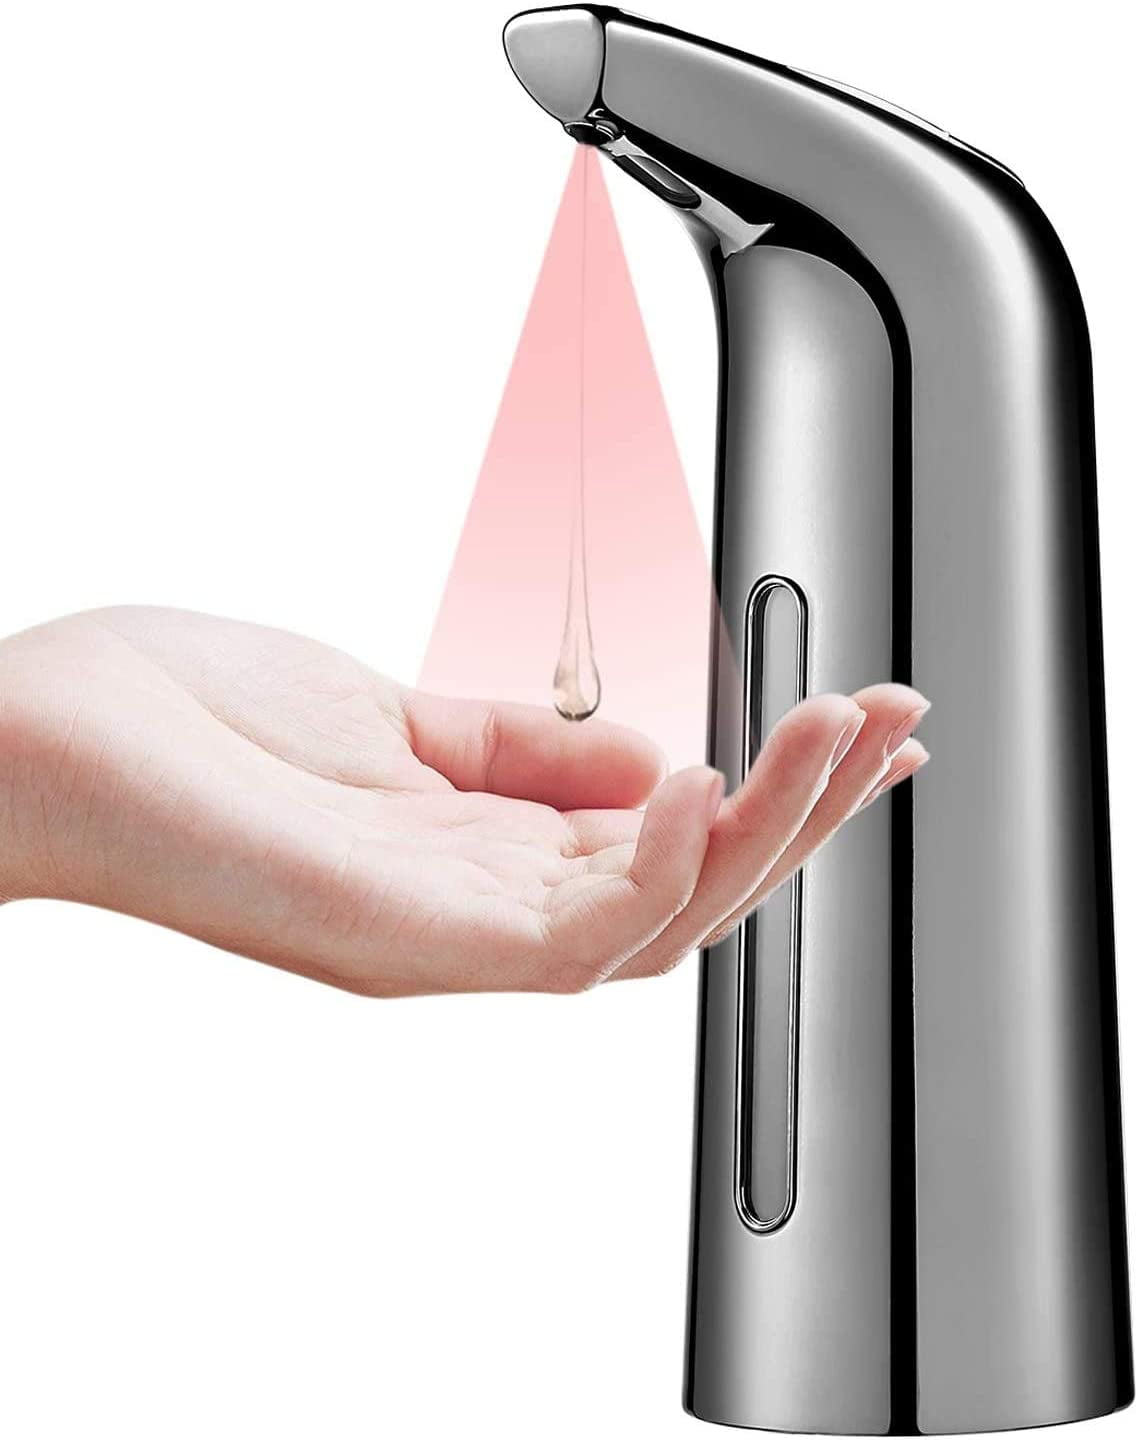 Easy to Refill and Clean Automatic Soap Dispenser 400ml IPX6 Waterproof Touchless Leakproof Electric Soap Dispenser with Sensitive Infrared Motion Sensor for Kitchen Bathroom Office Toilet Silver 